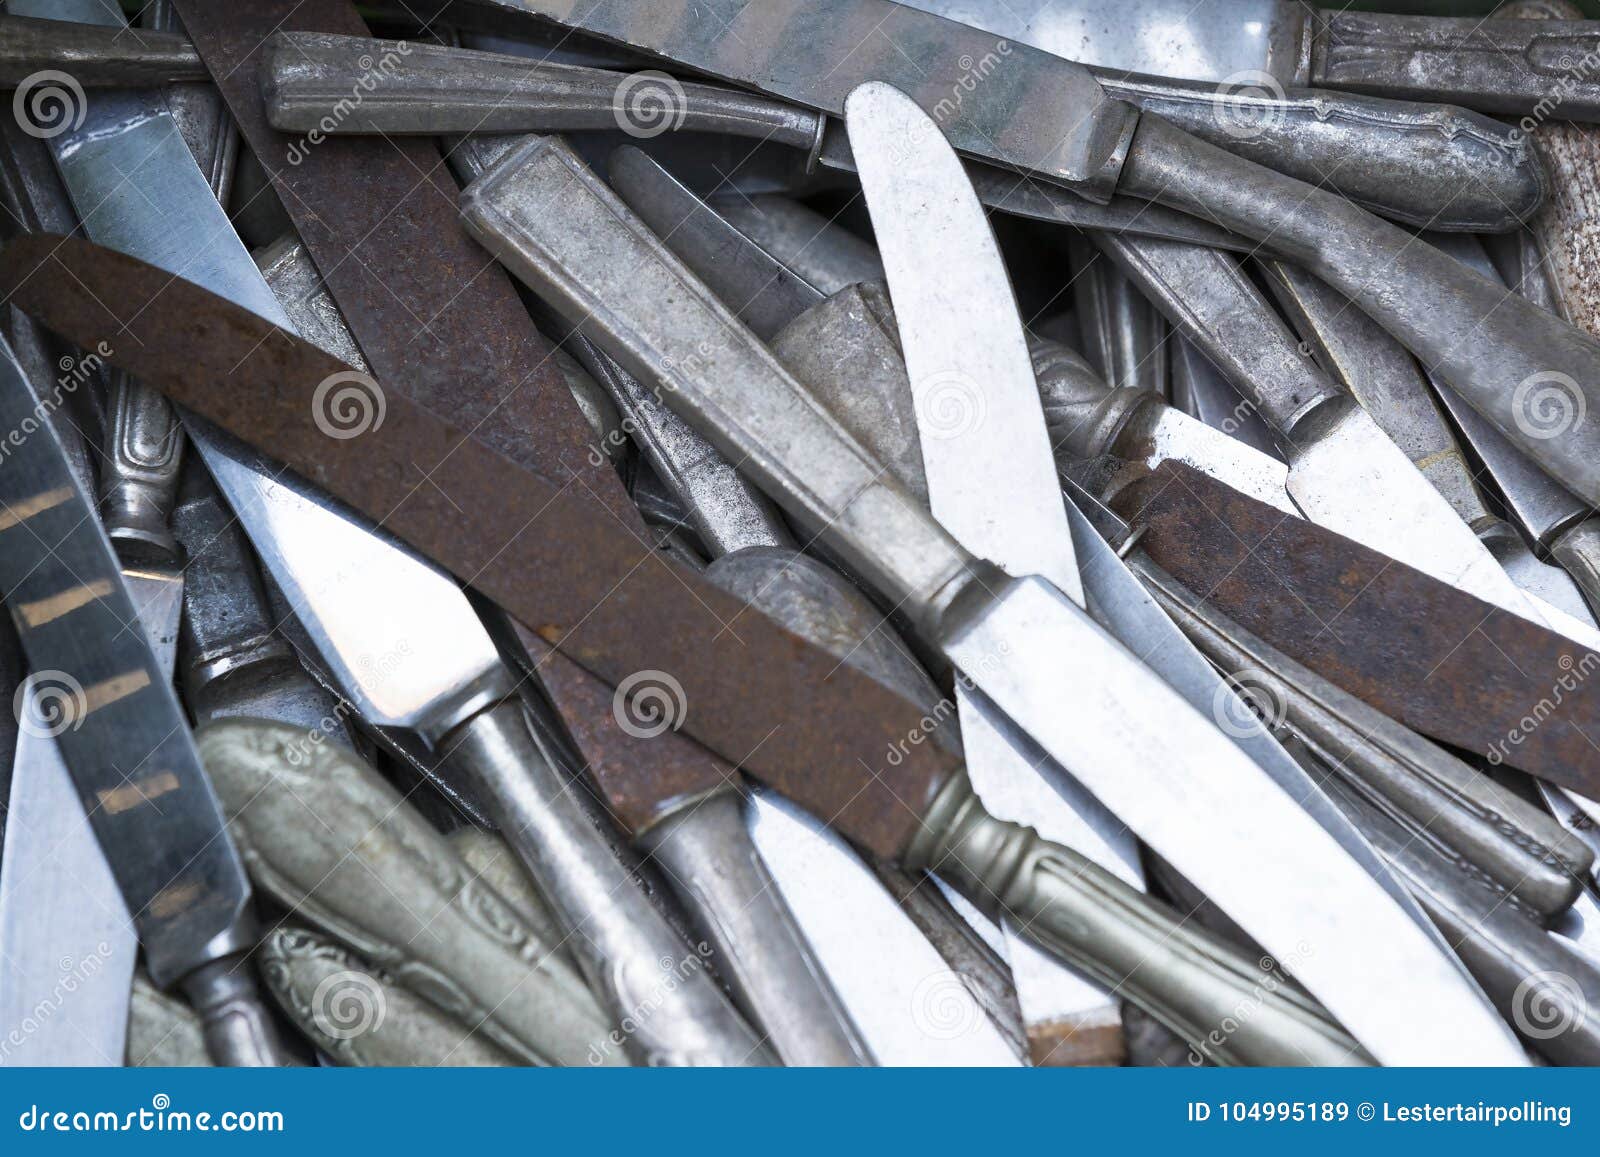 background of old dirty cutlery